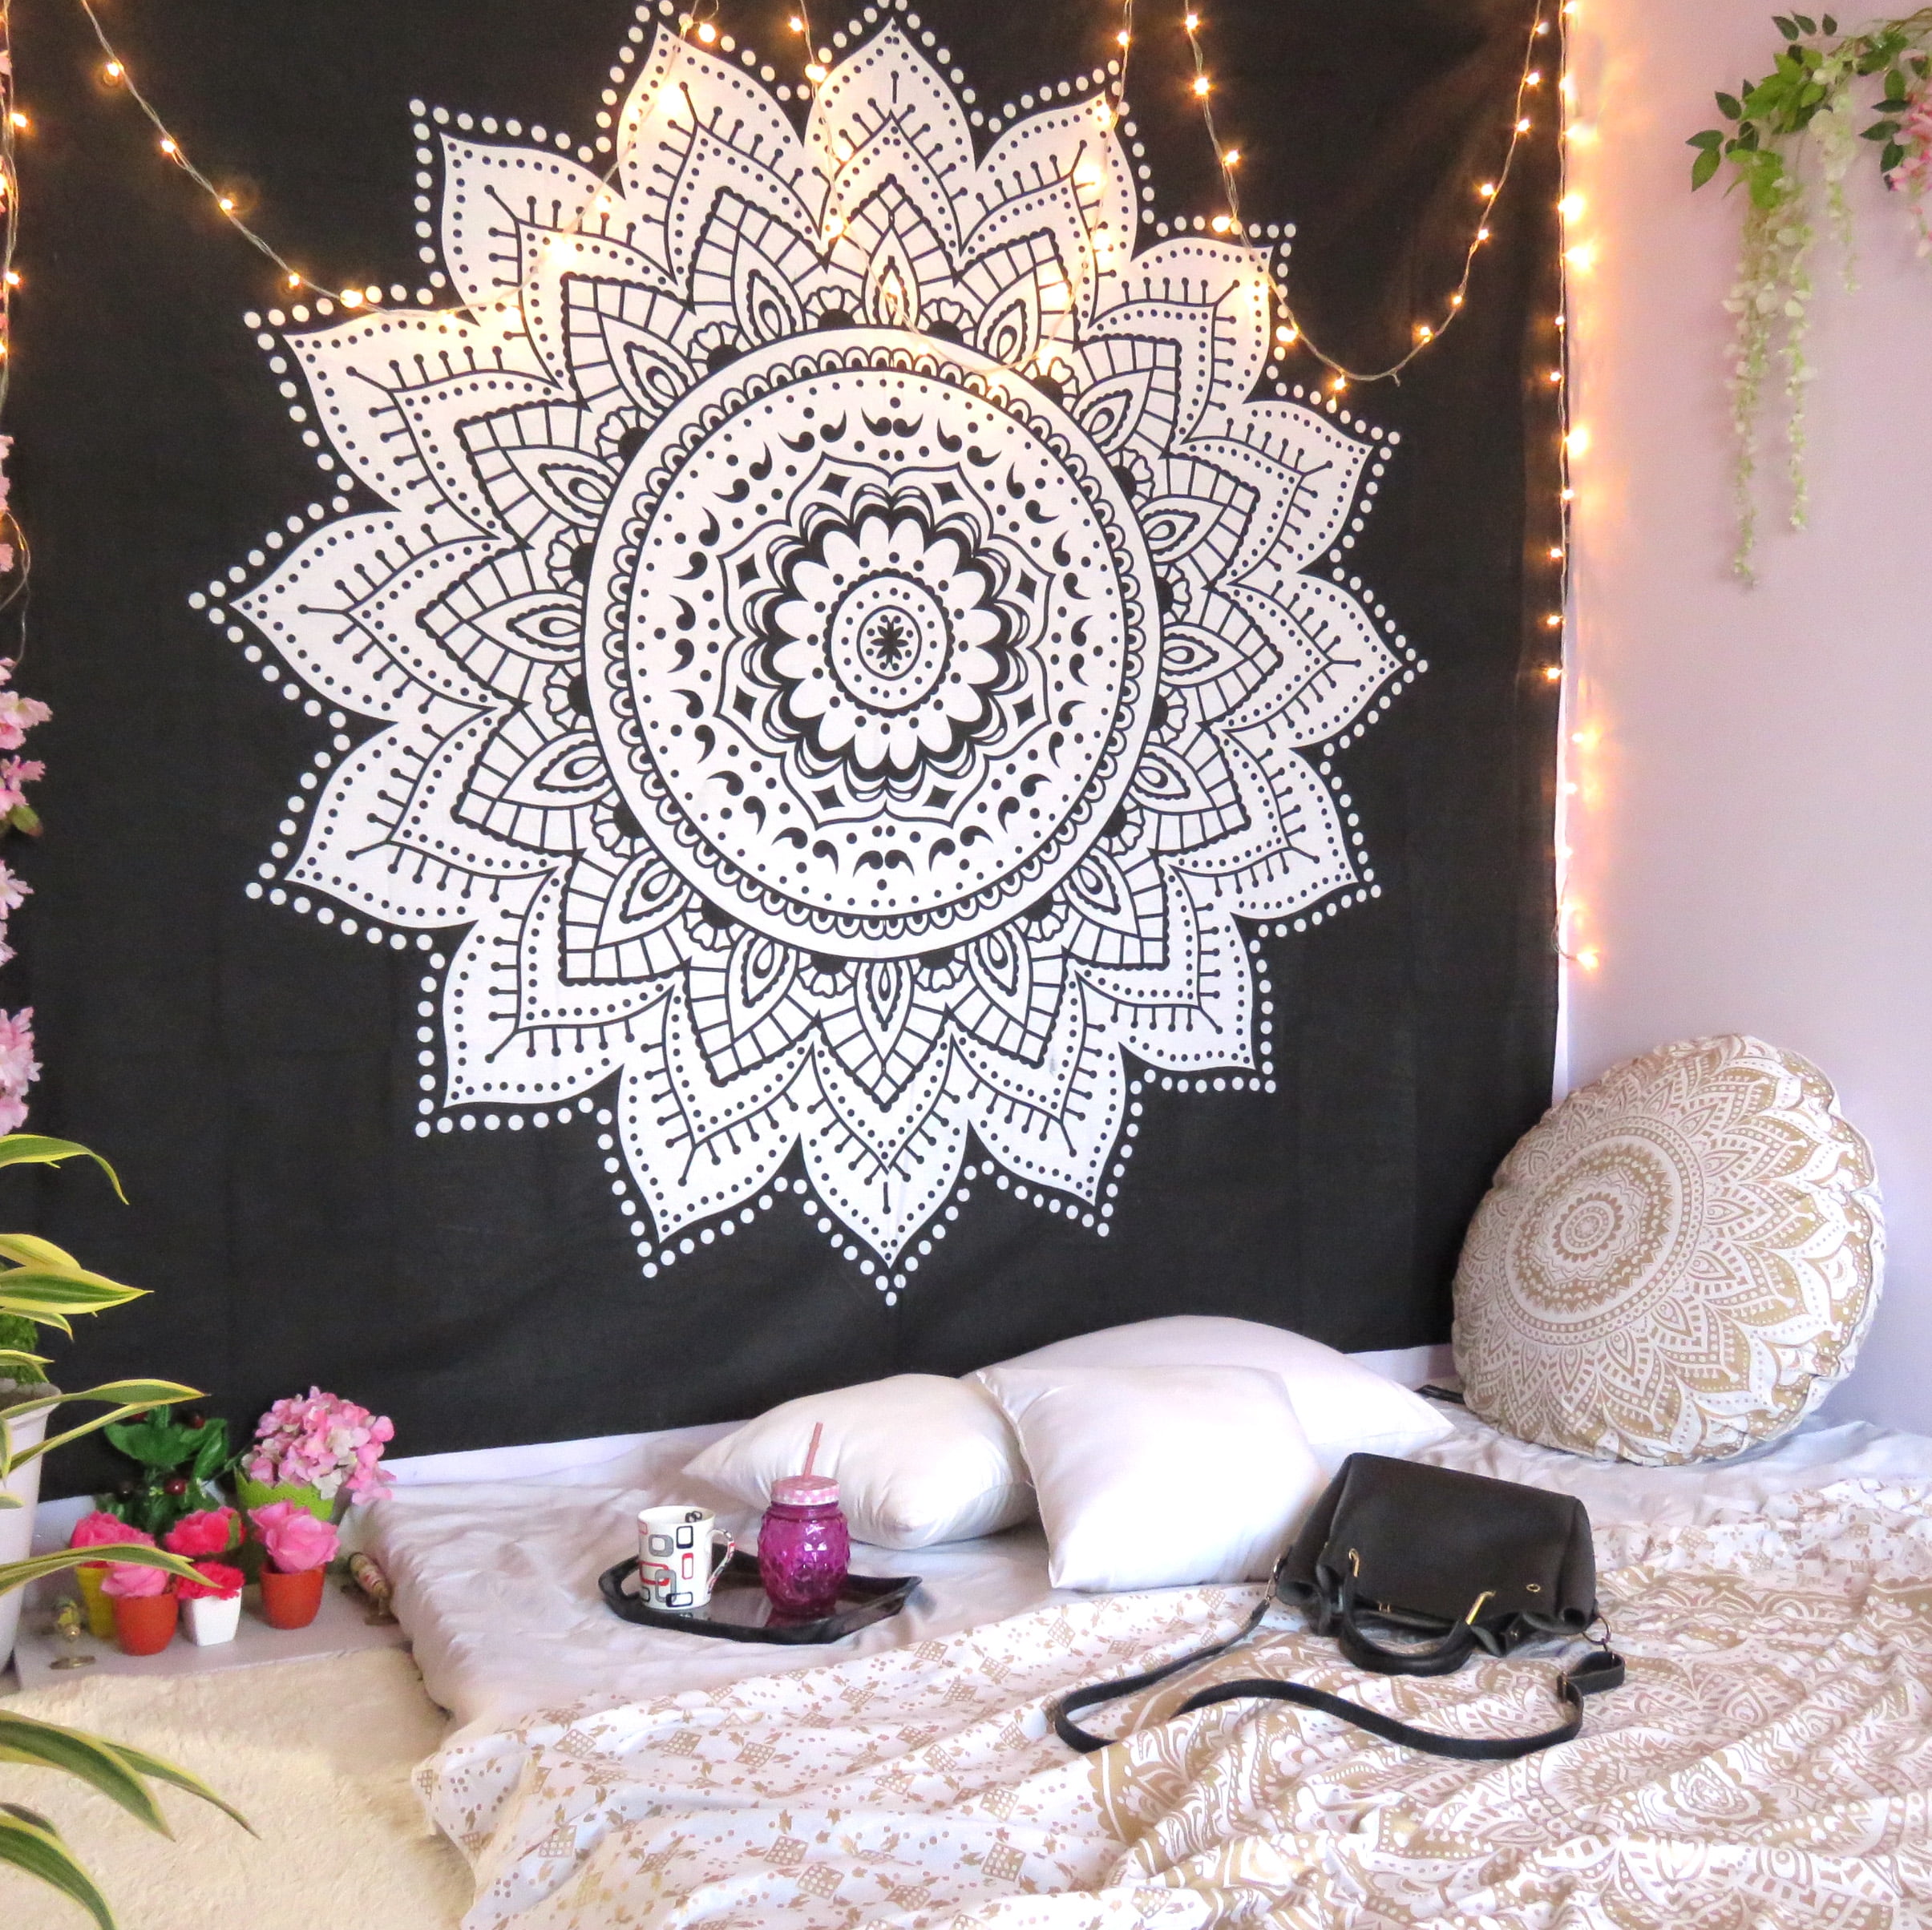 Indian Mandala Queen Tapestry Wall Hanging Hippie Throw Bohemian Gypsy Bedspread 